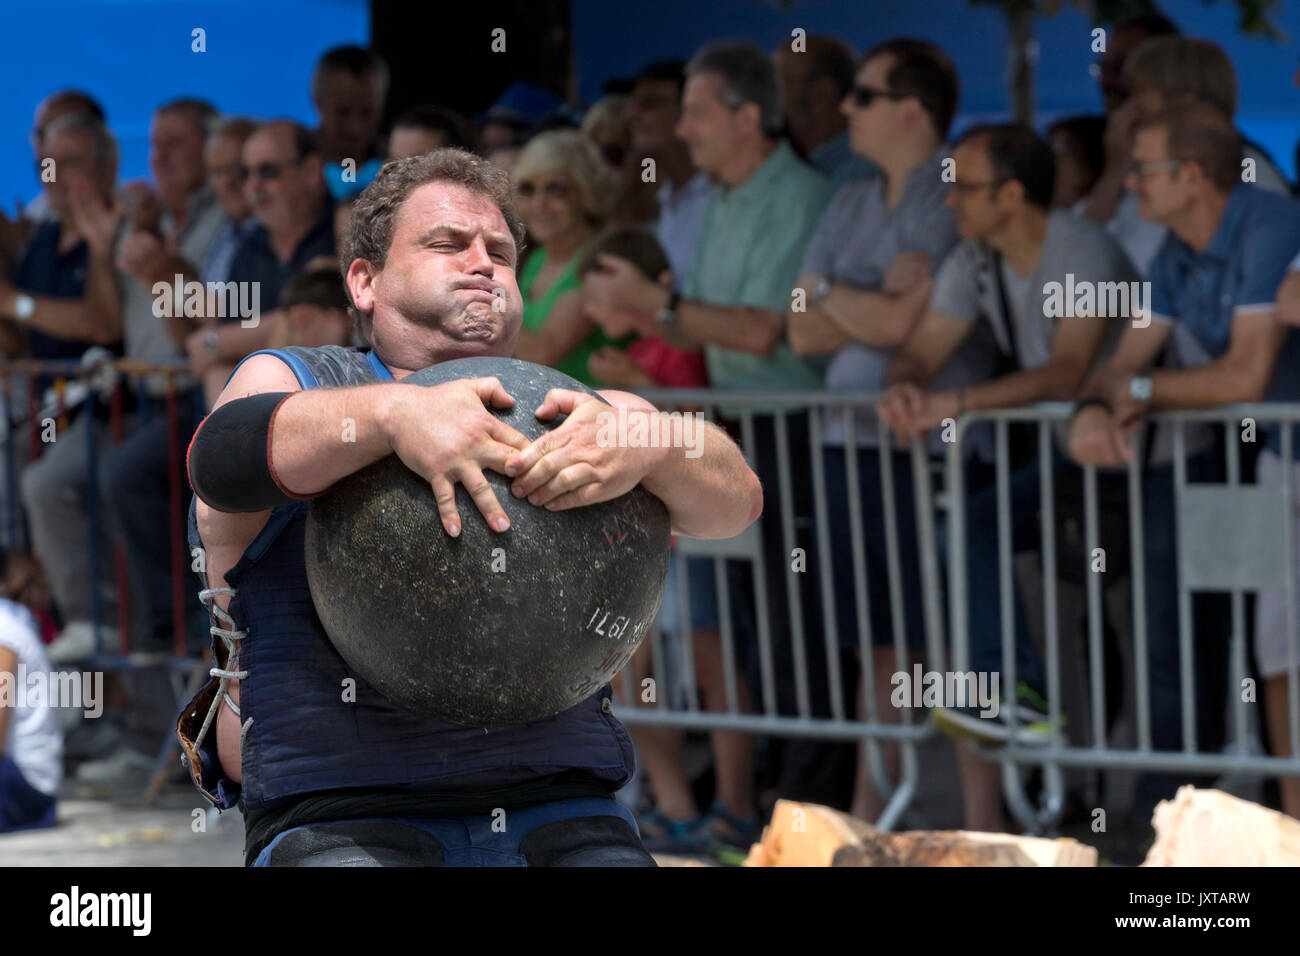 Basque stone lifter (harrijasotzaile) lifting a round stone in a competition. Stock Photo